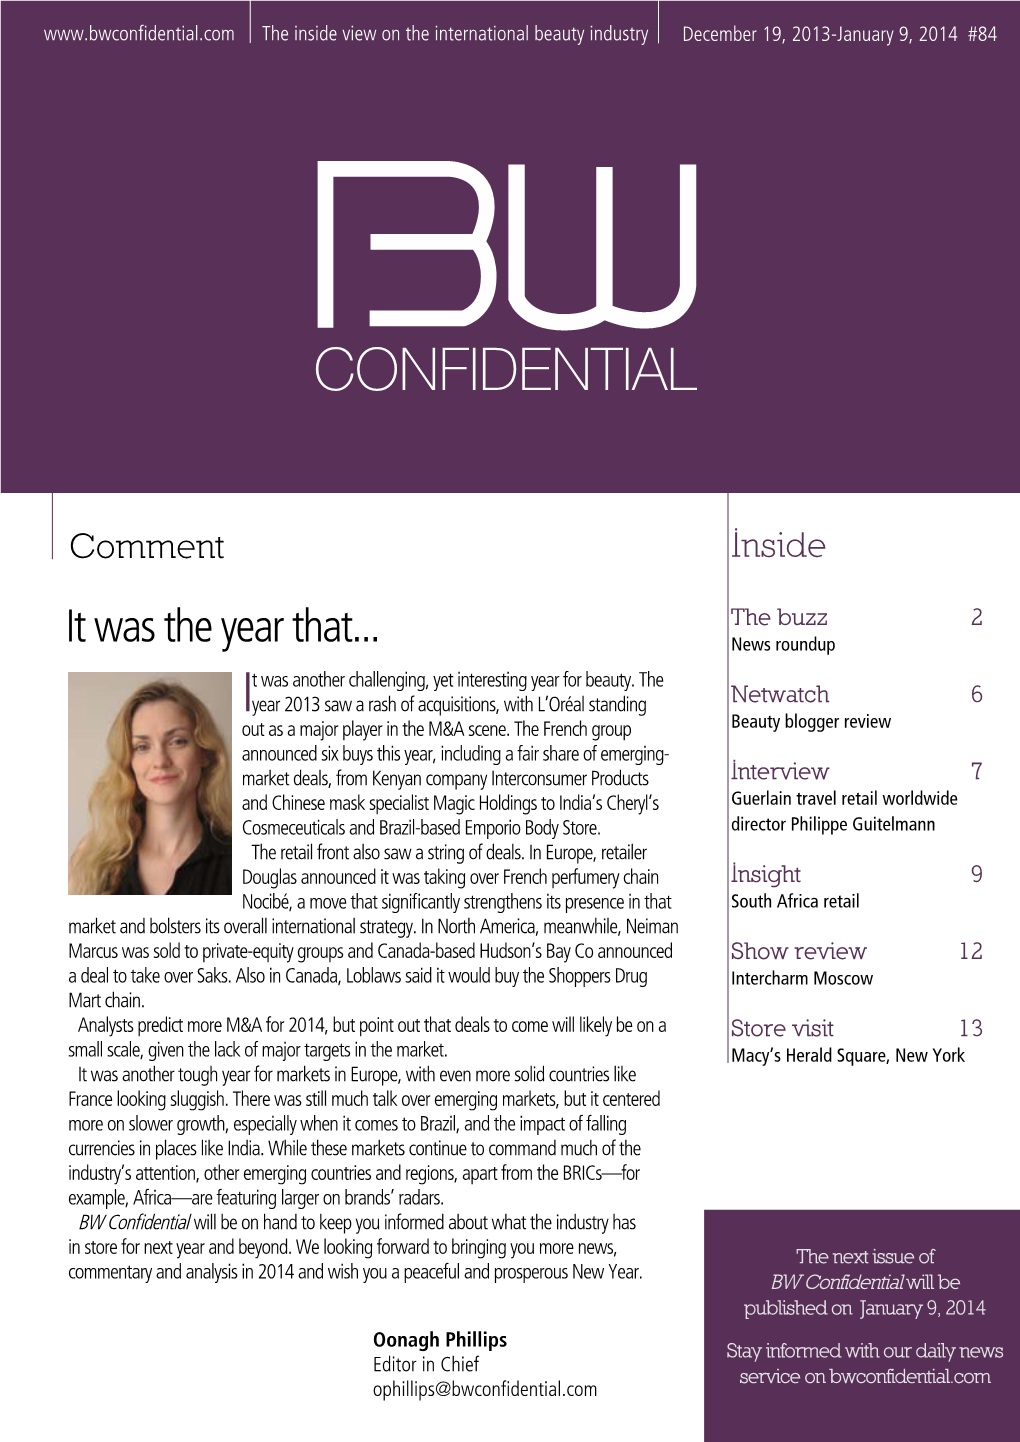 BW Confidential Will Be on Hand to Keep You Informed About What the Industry Has in Store for Next Year and Beyond